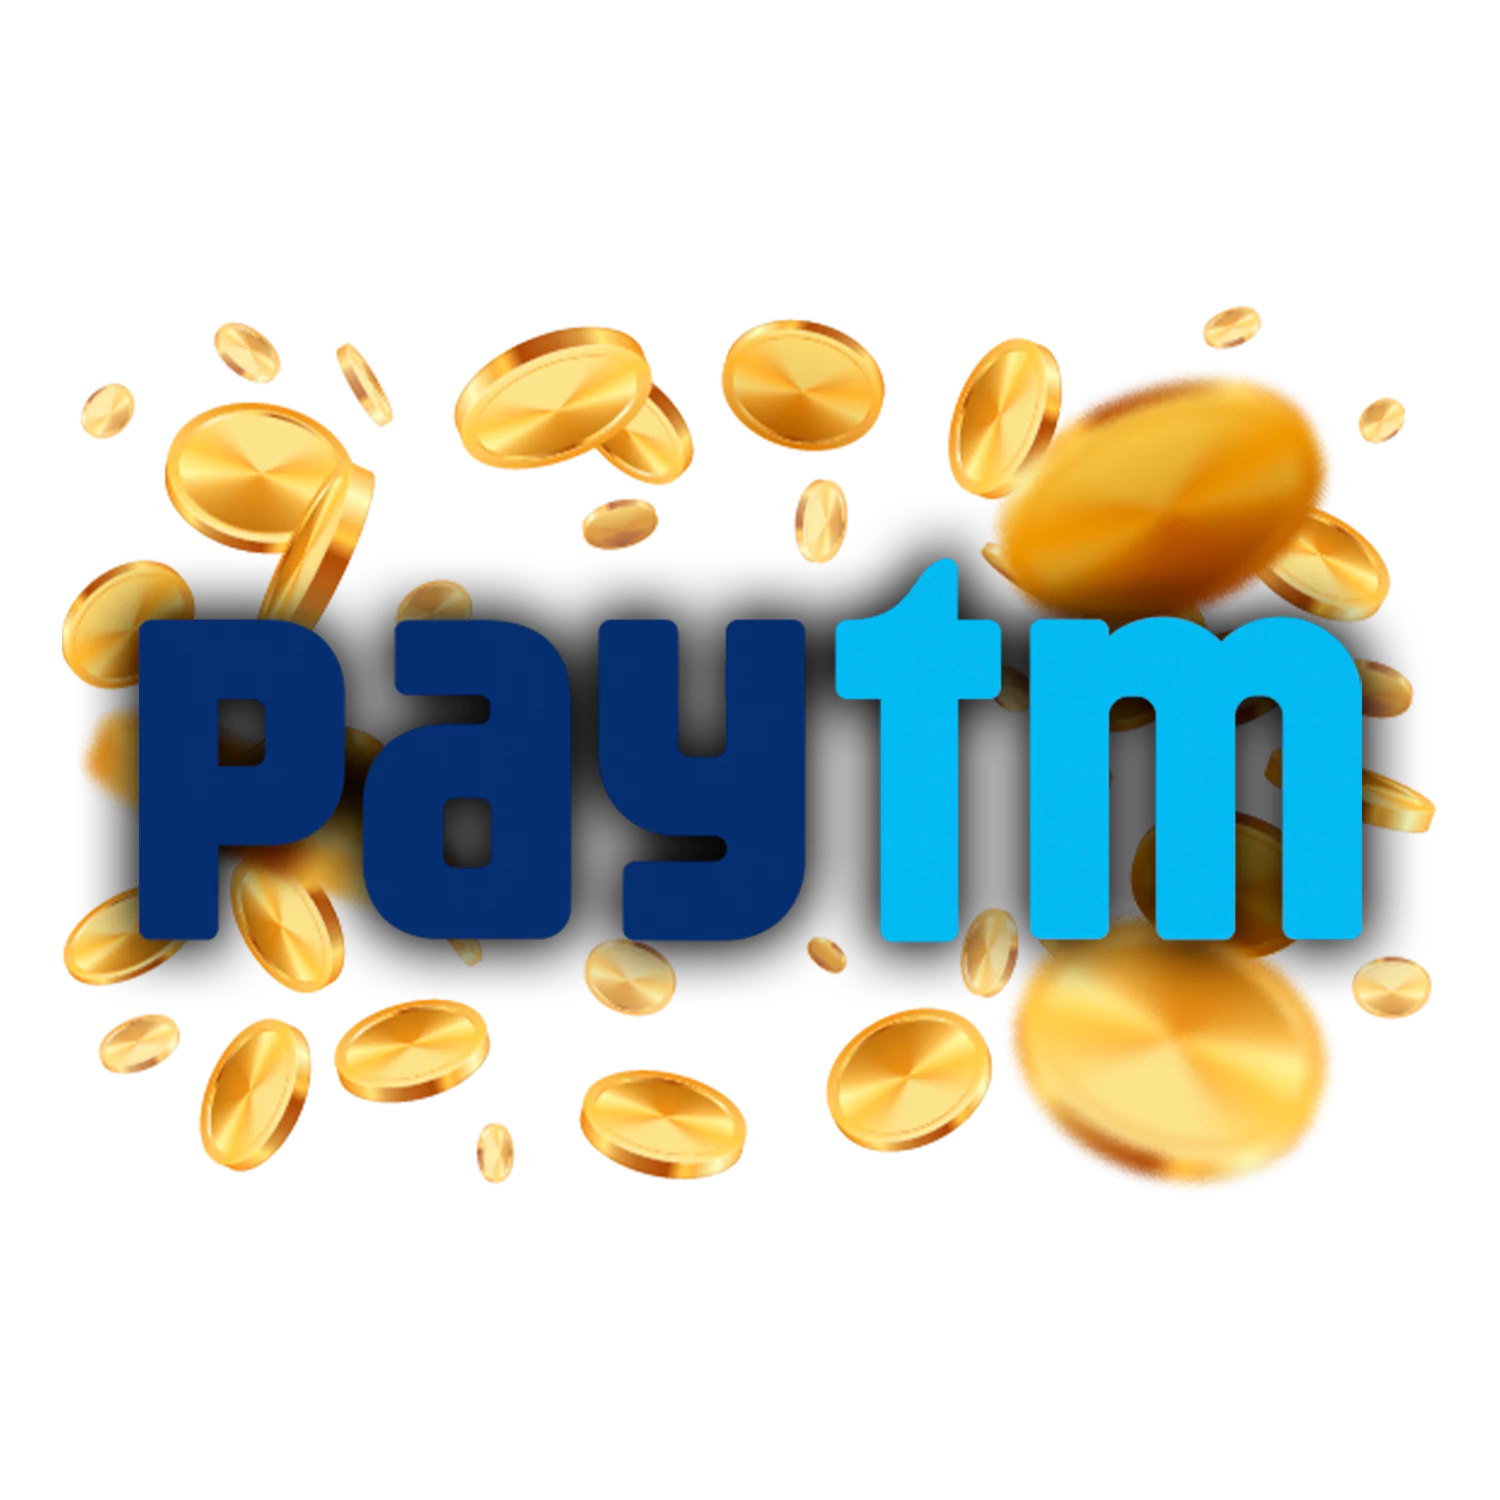 Paytm is a great method for deposits in India.